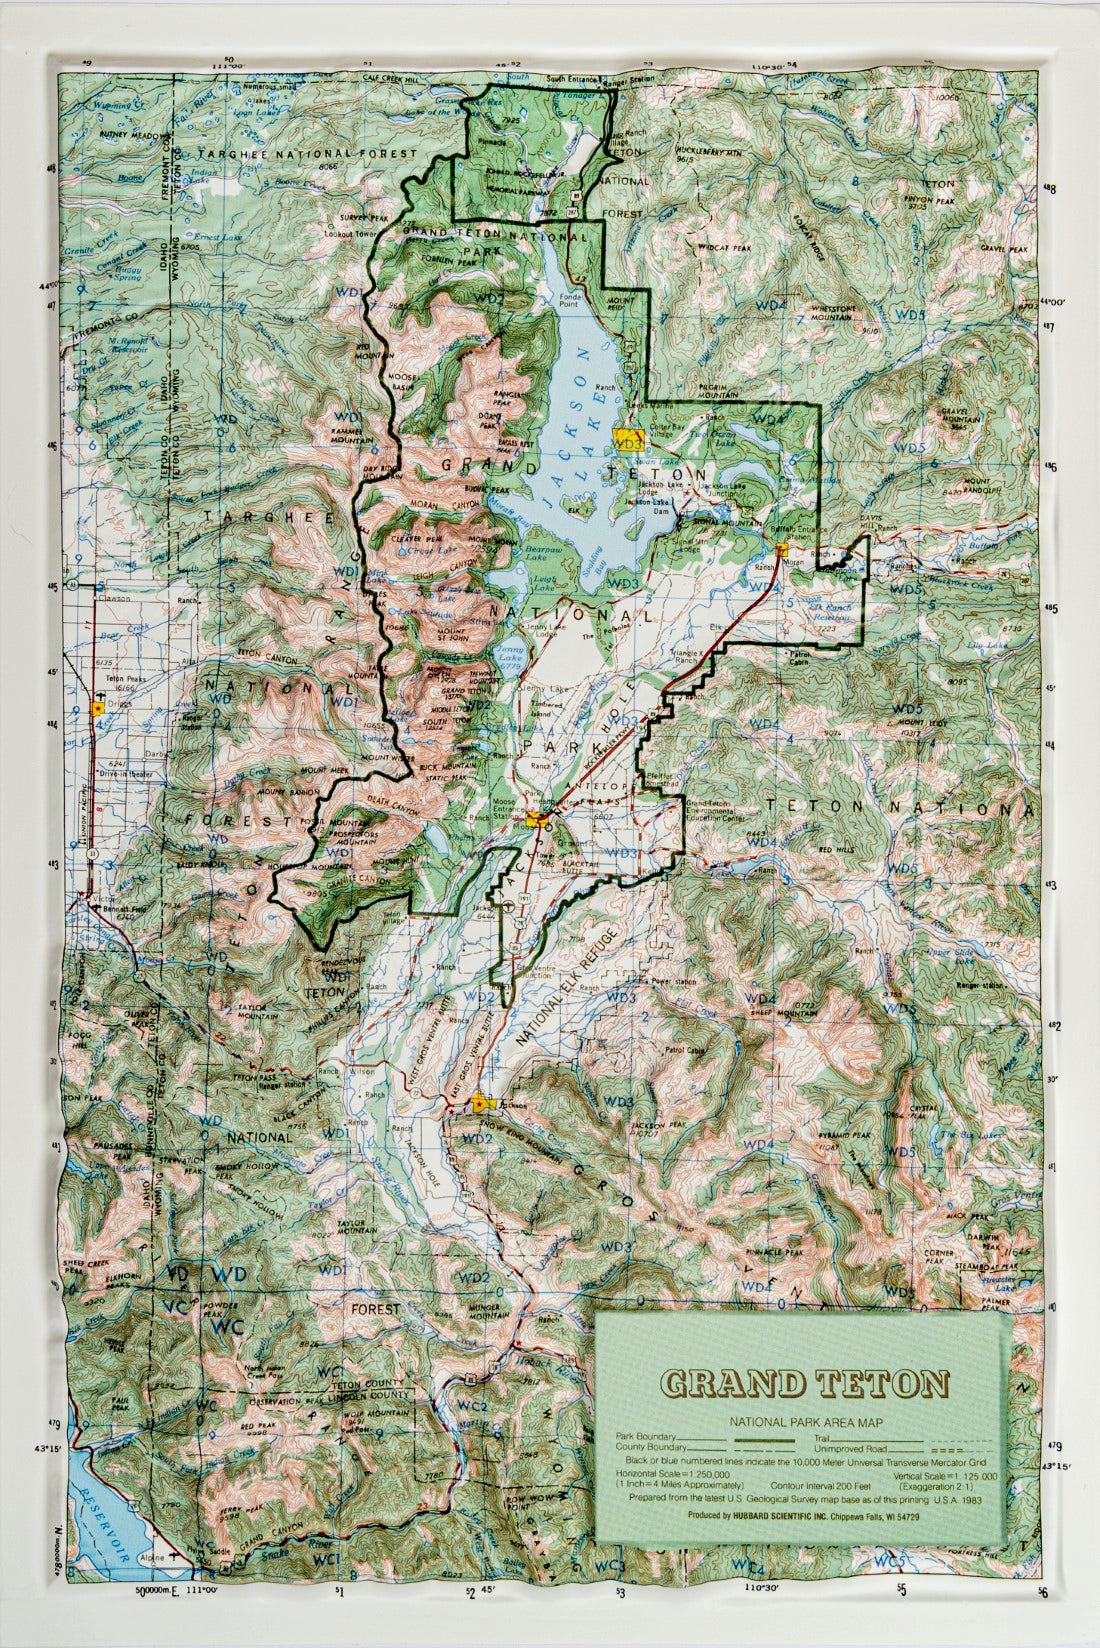 Grand Teton National Park Raised Relied Map